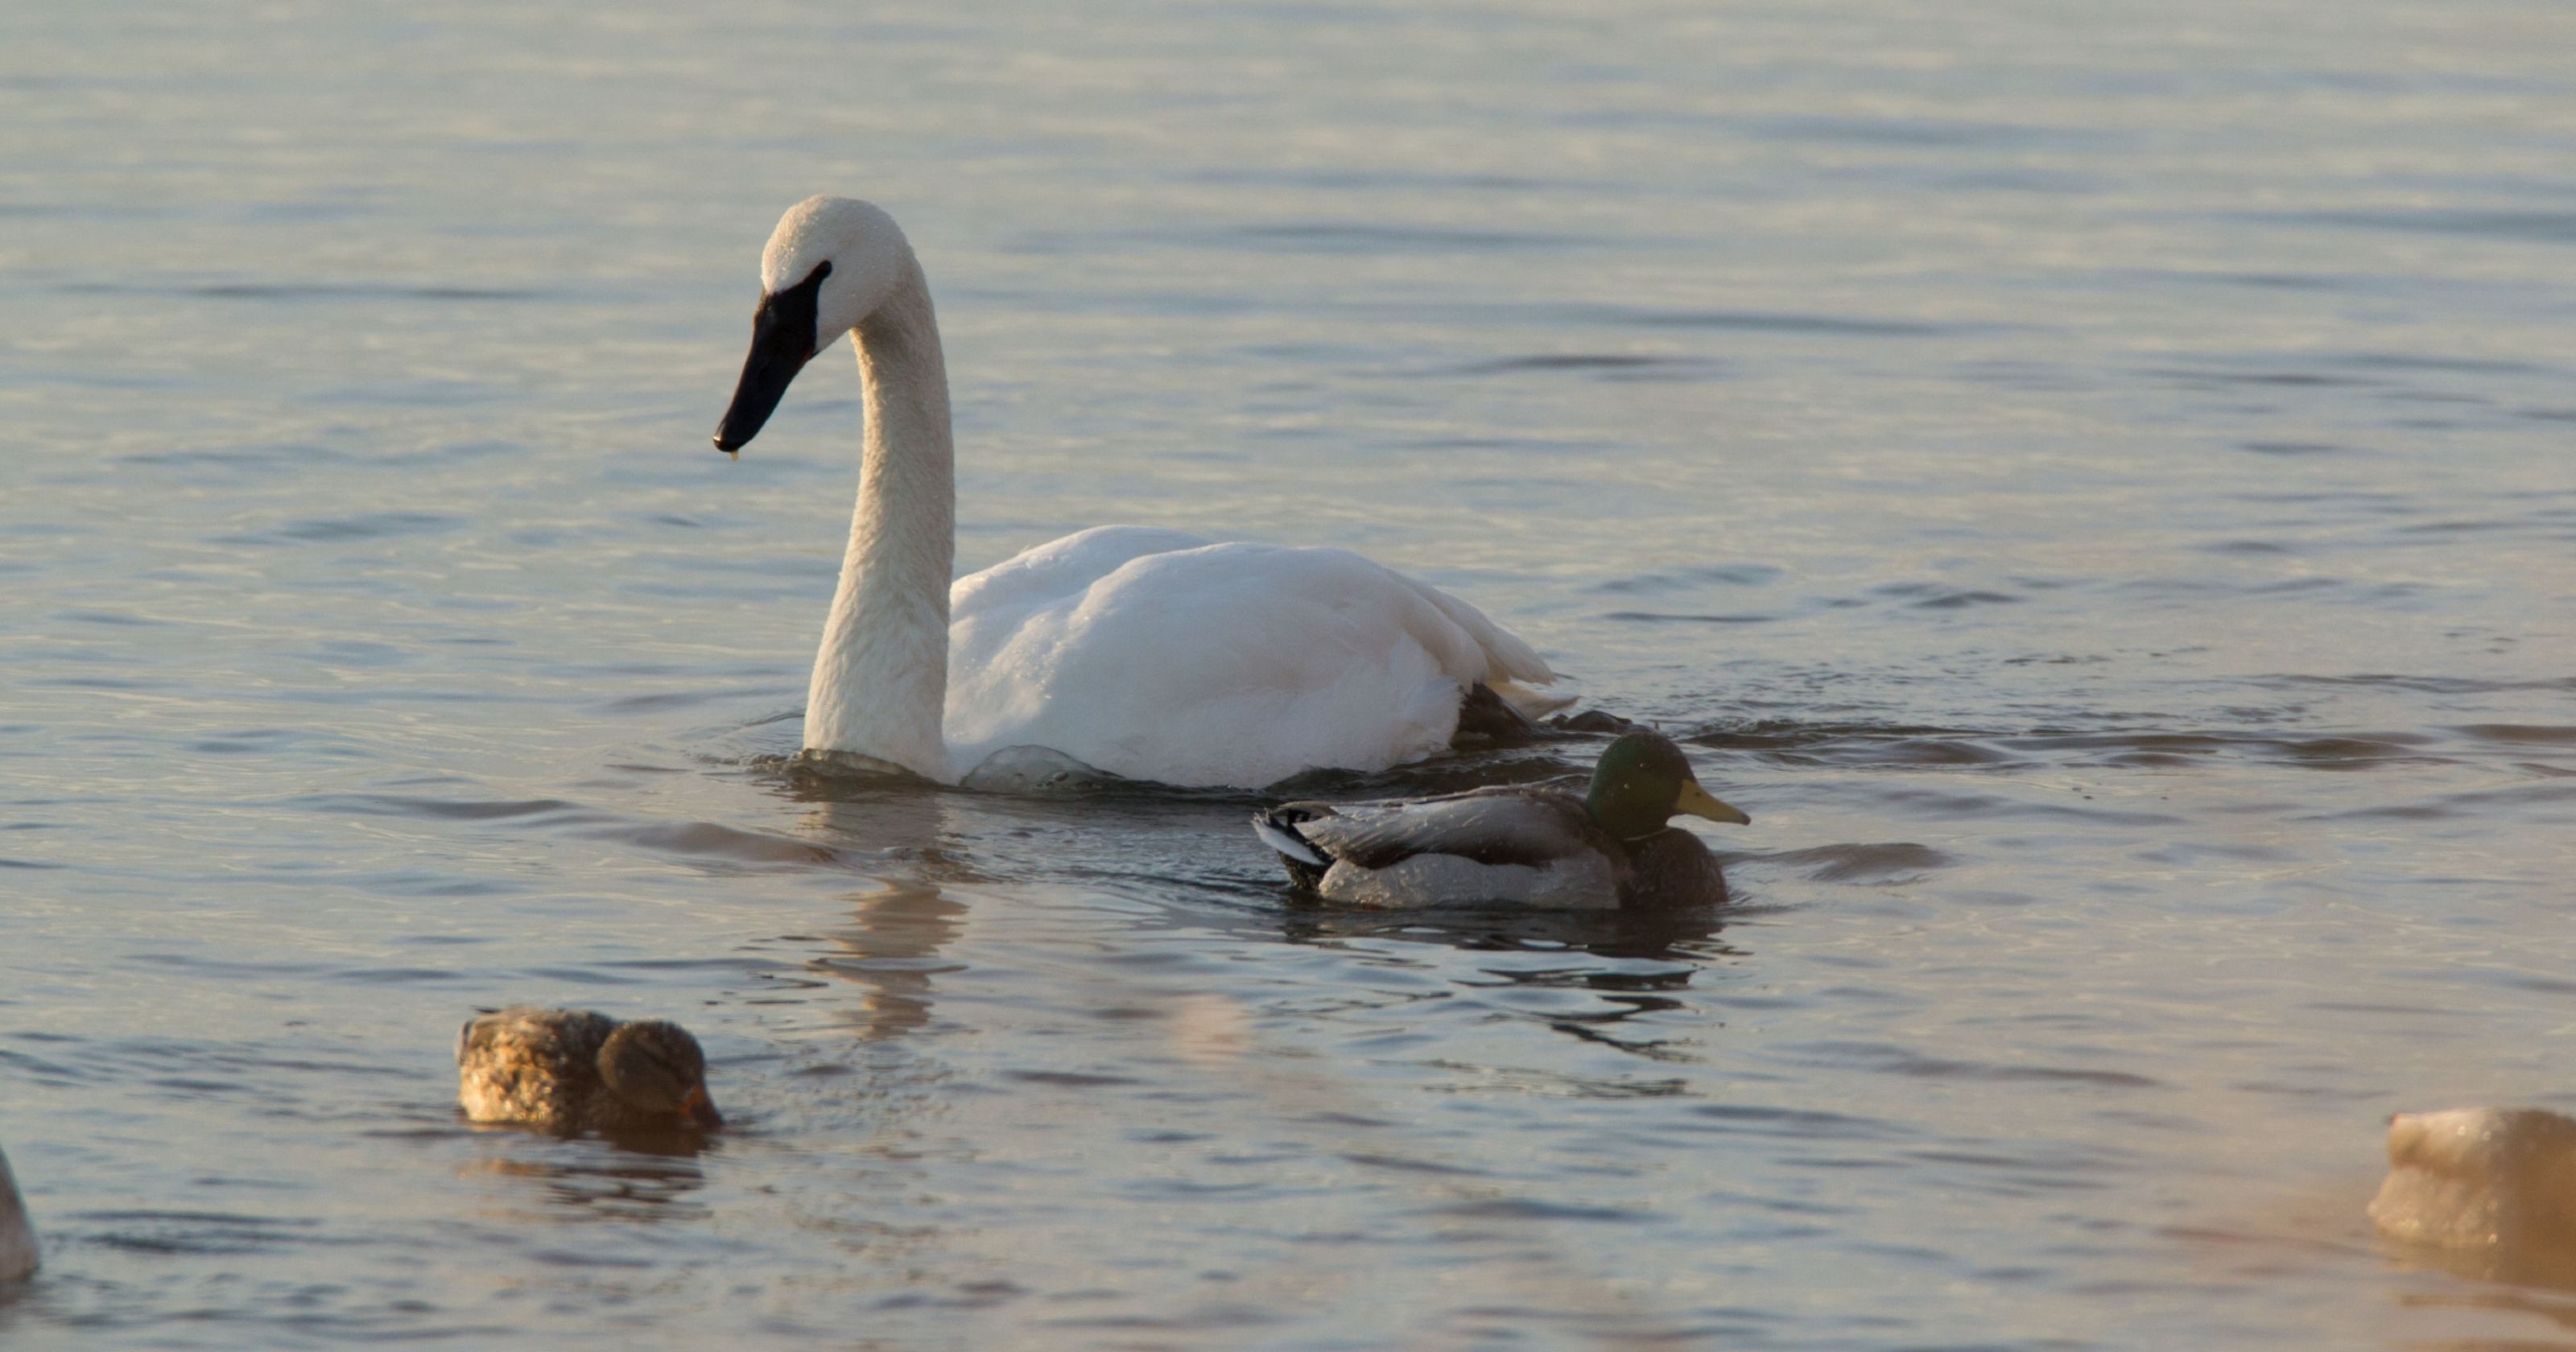 Critter of the Week: Trumpeter swan